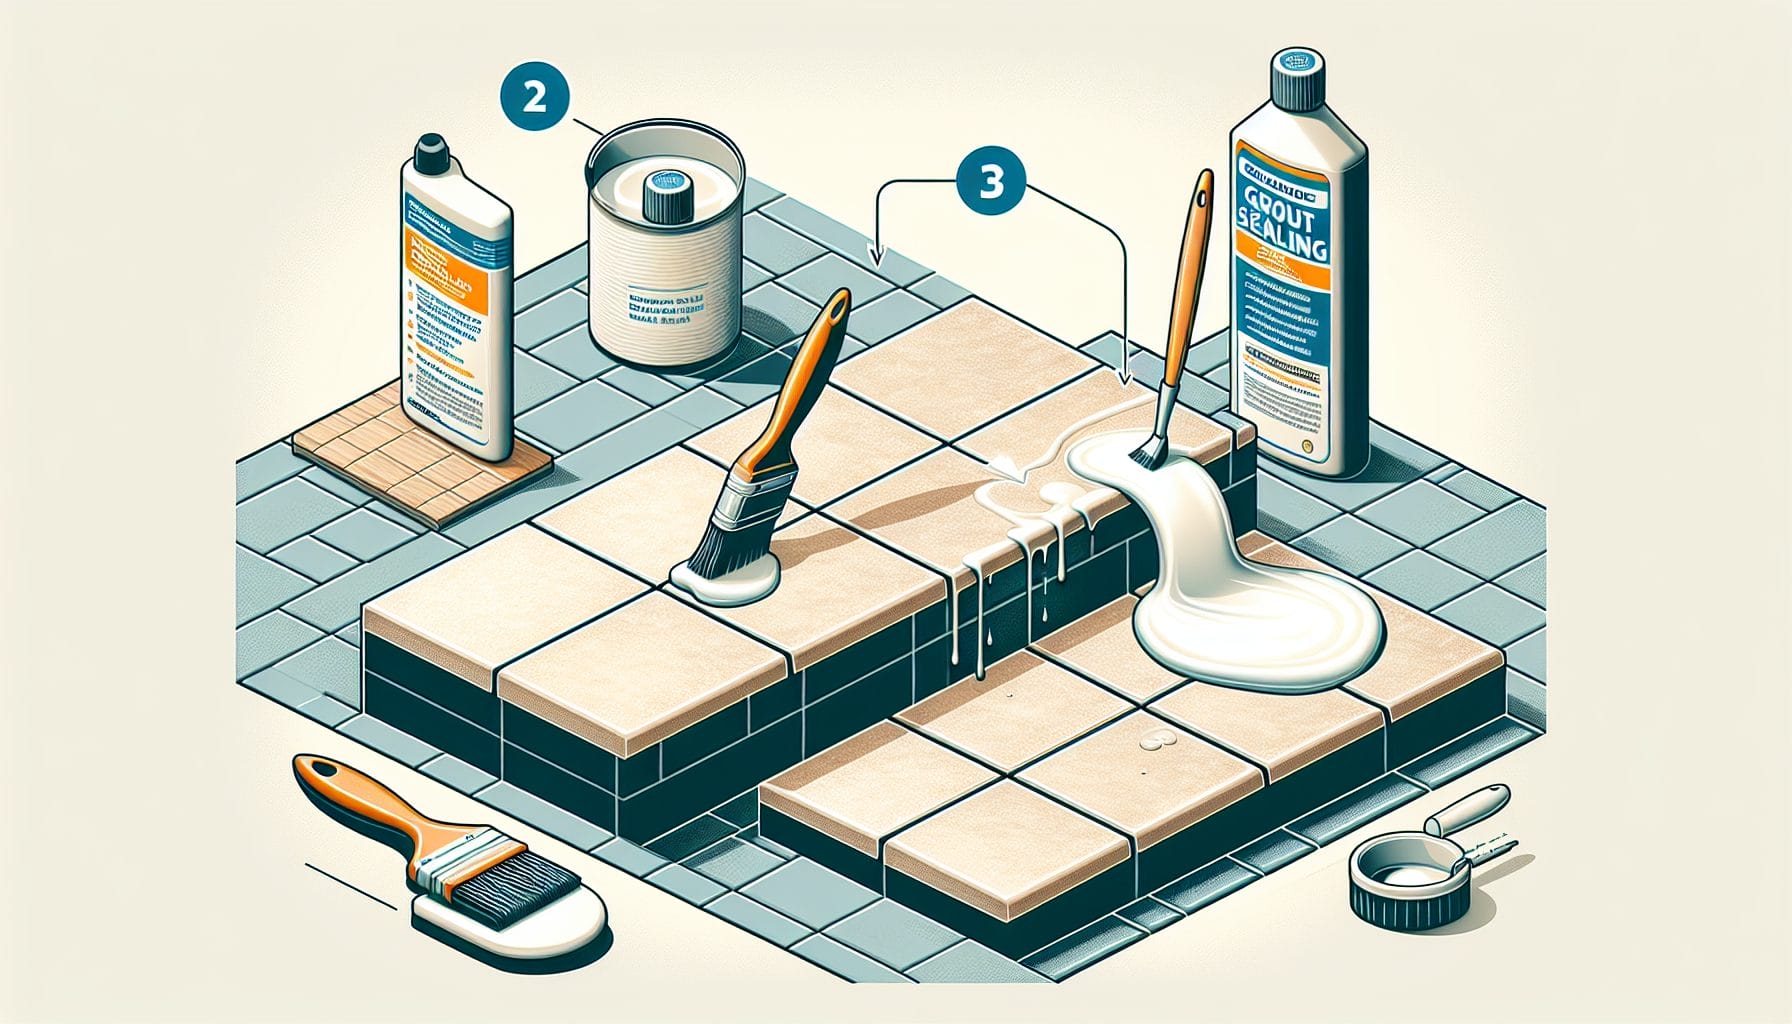 A step by step instructions to apply grout sealant